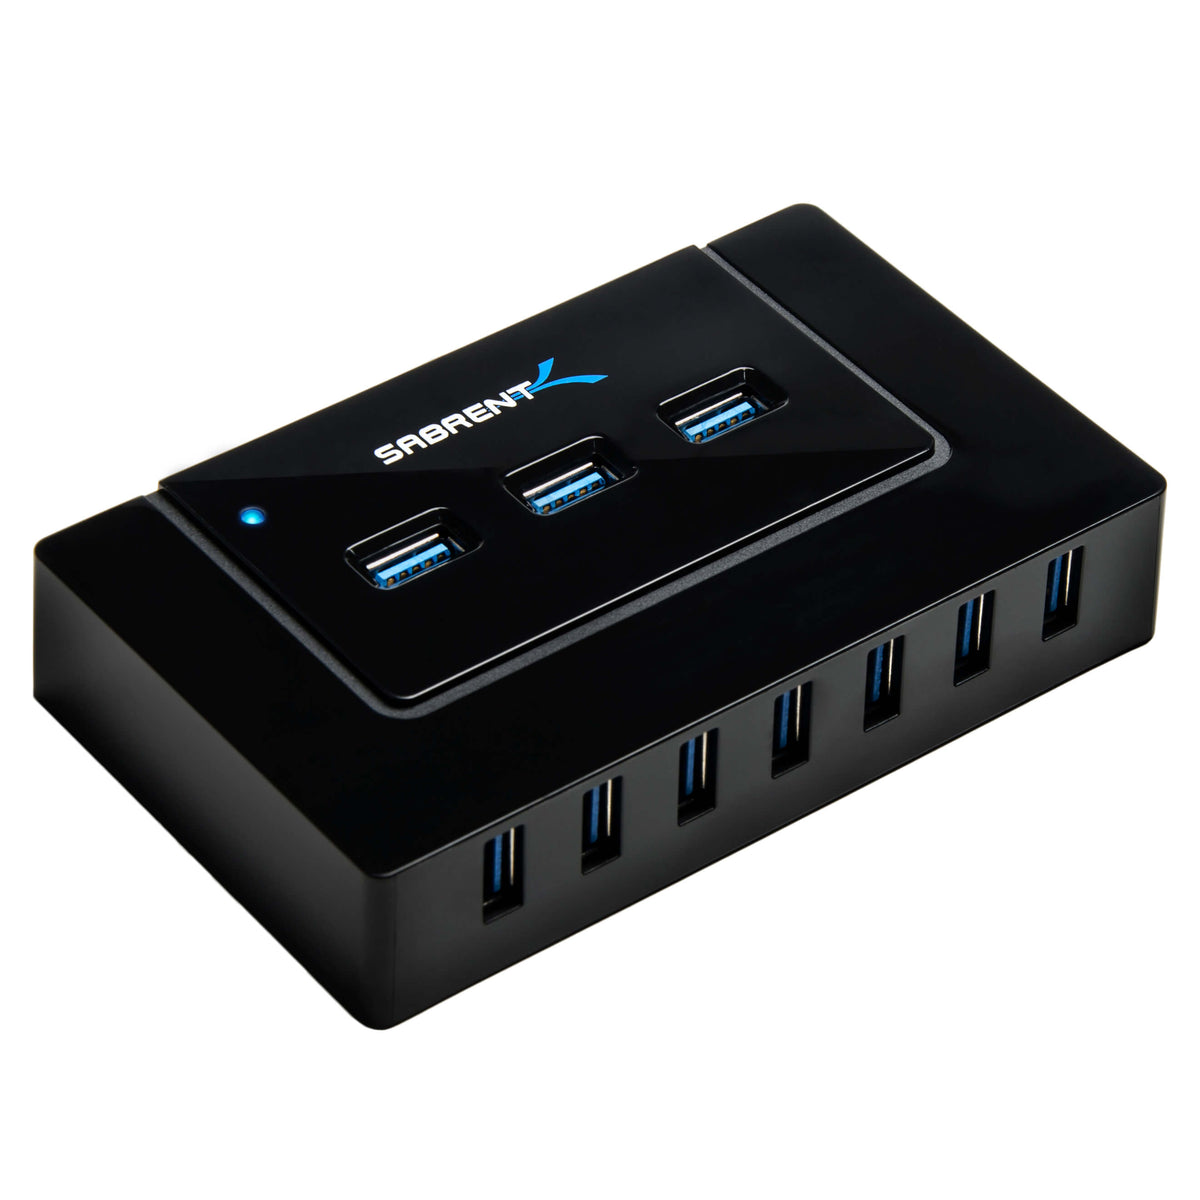 10 Port USB 3.0 Hub with 4A Power Adapter